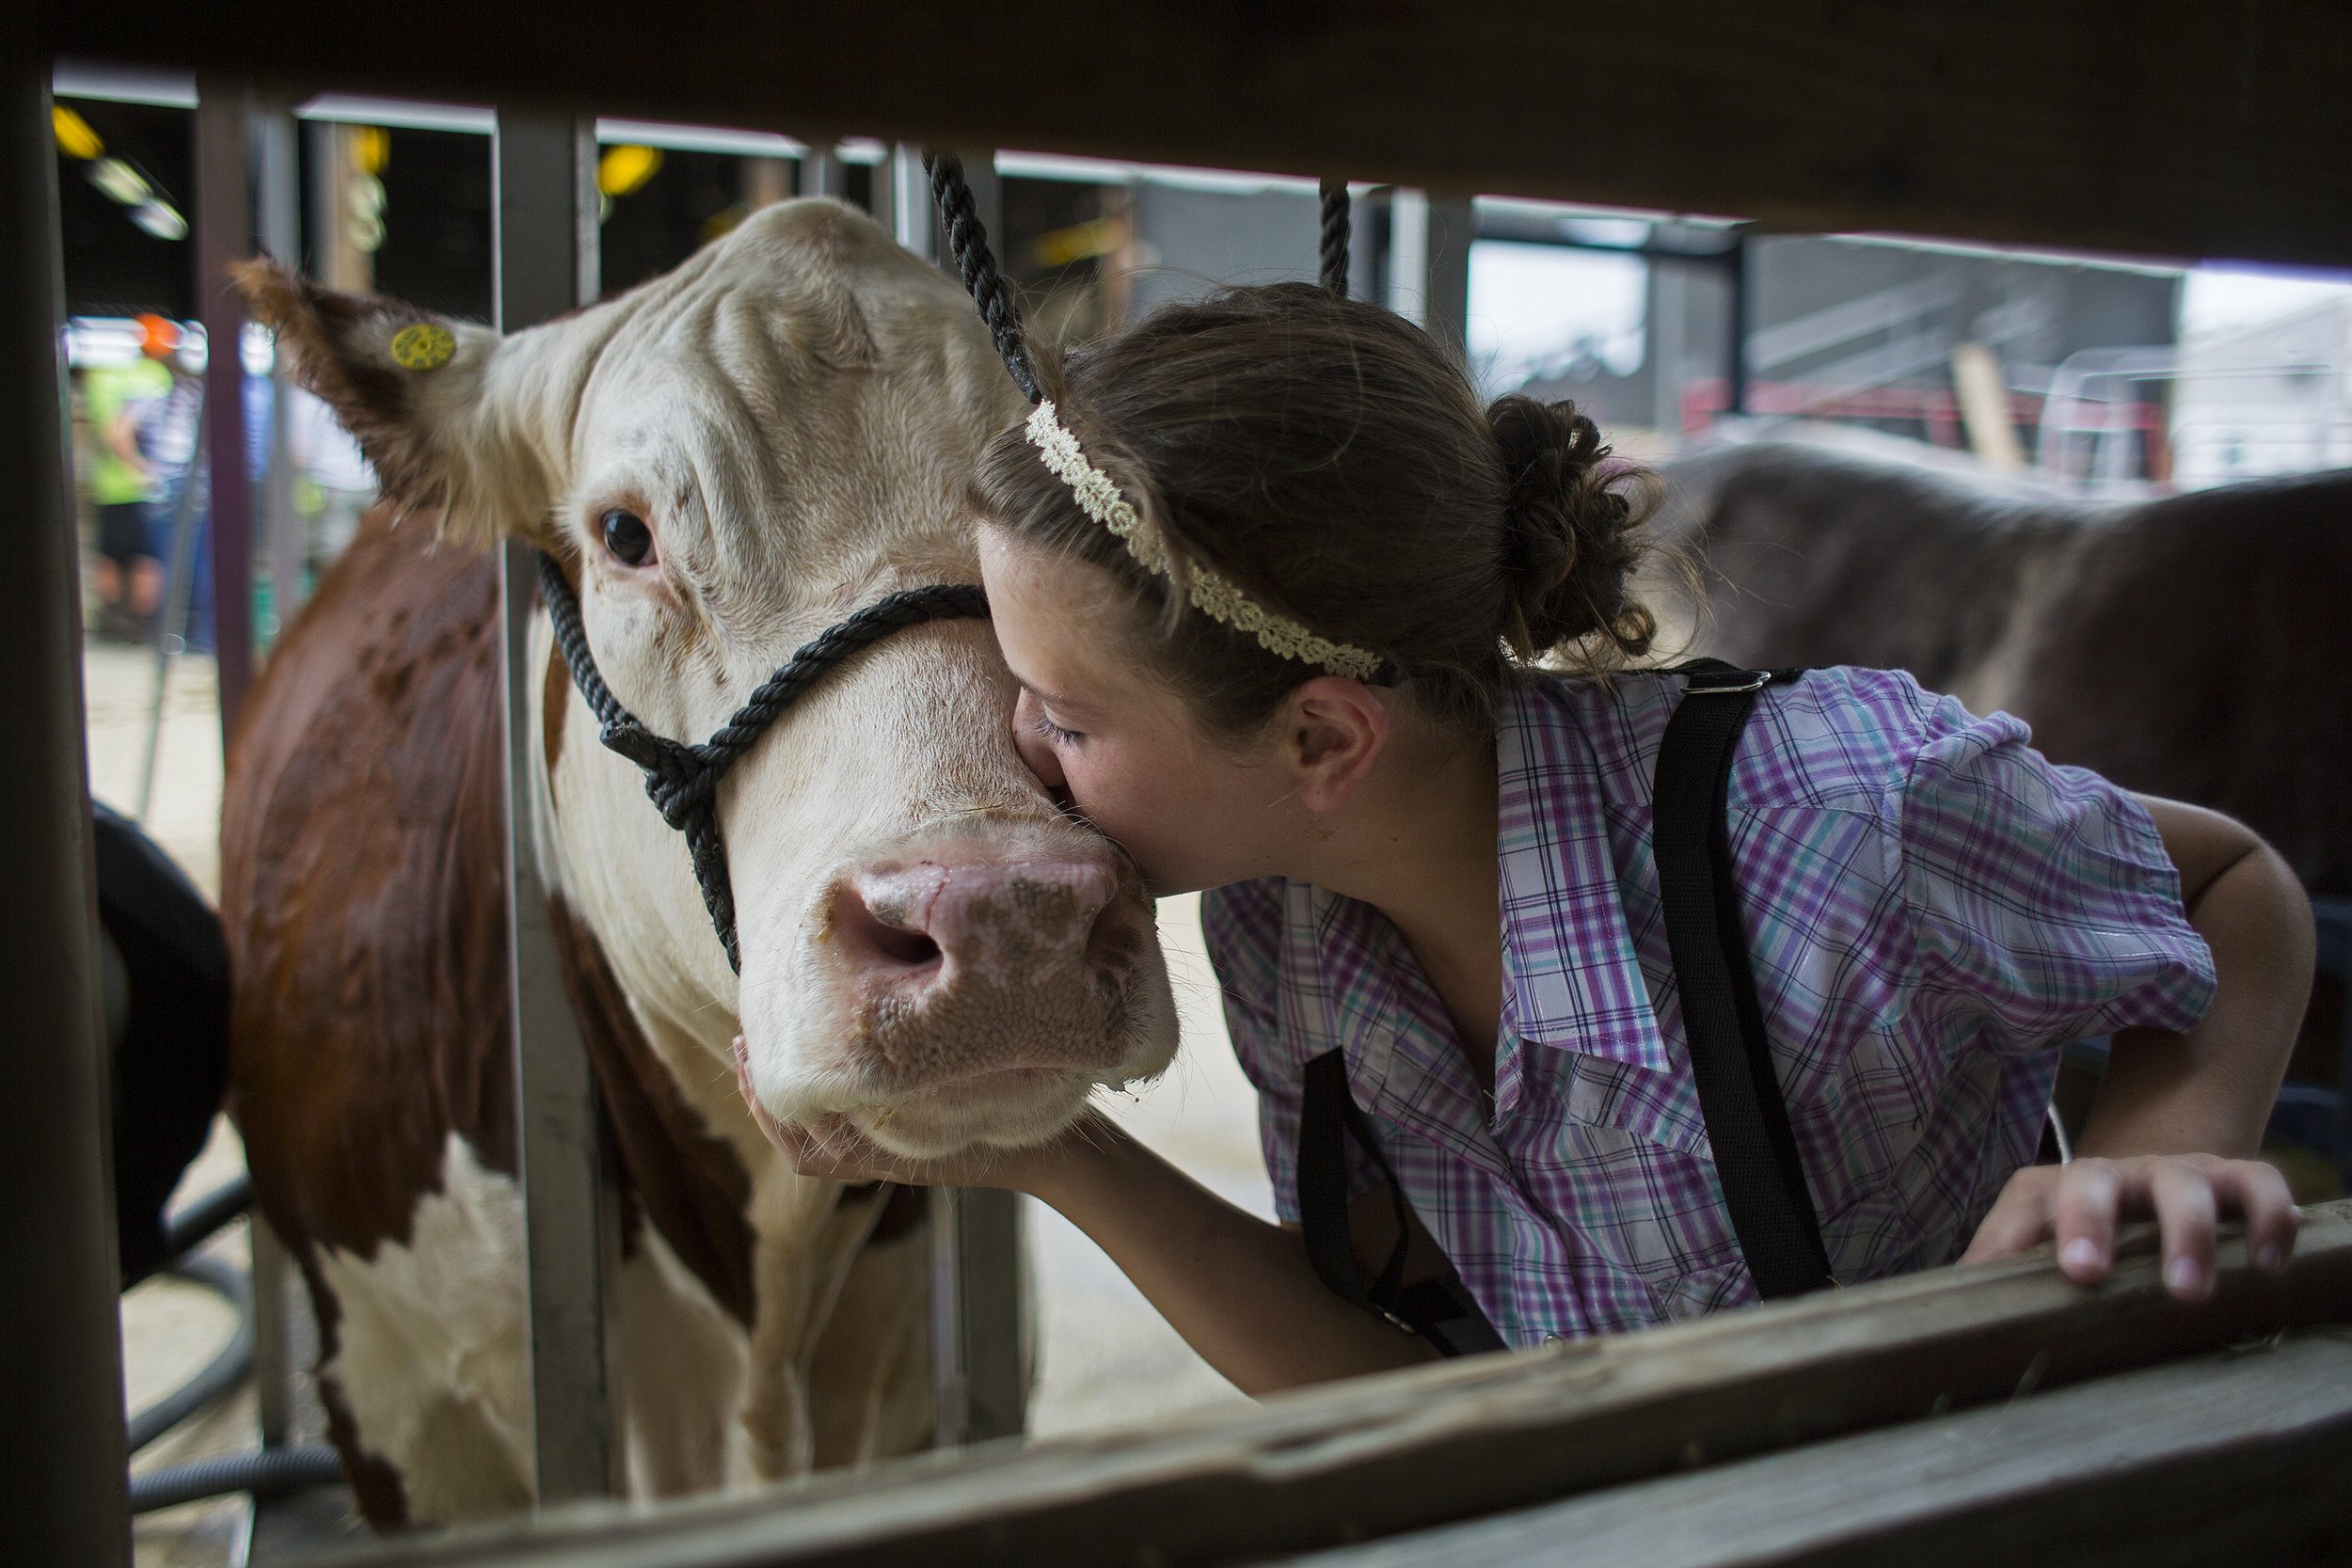  “He’s so sweet and kind and loving,” said 12-year-old Cheyenne Scherle of Ireland about Bubby shortly after she gave him a kiss July 19 at the Dubois County 4-H Fairgrounds in Bretzville, Indiana. Scherle, who shows sheep, goats, pigs and cattle at 